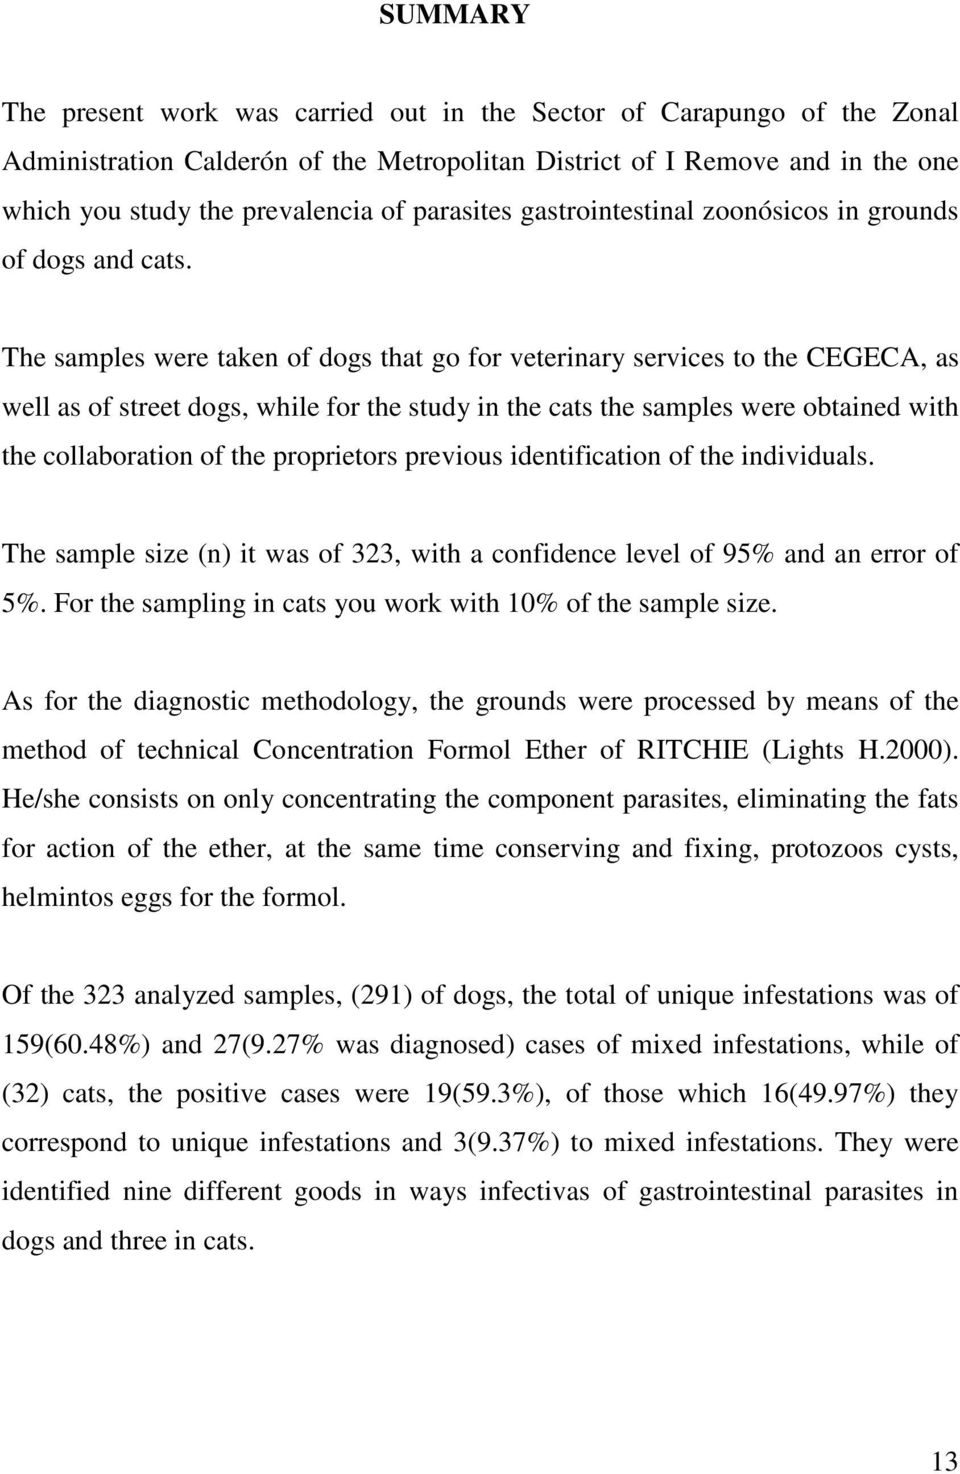 The samples were taken of dogs that go for veterinary services to the CEGECA, as well as of street dogs, while for the study in the cats the samples were obtained with the collaboration of the